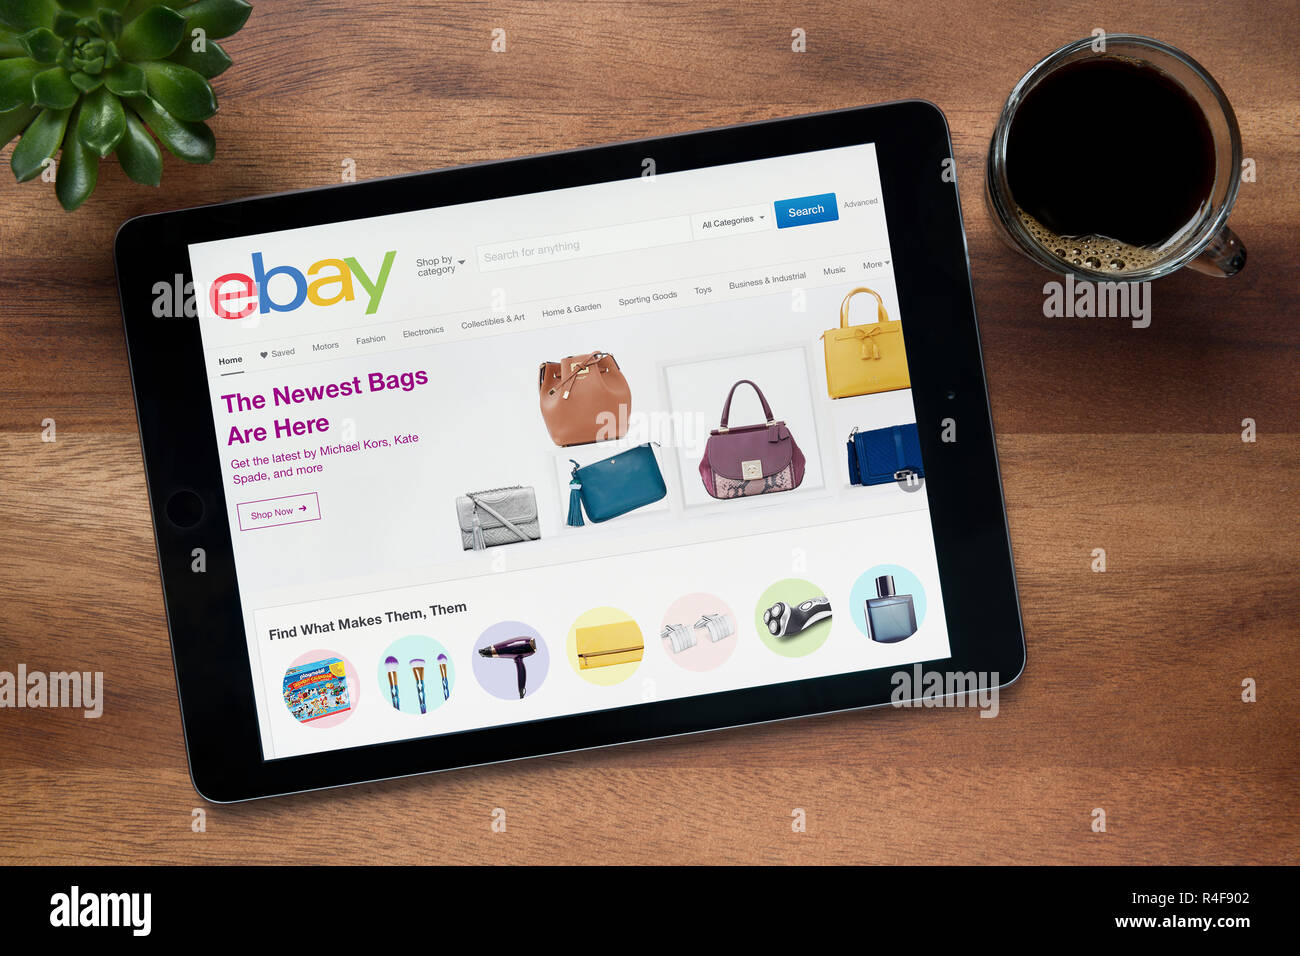 The website of ebay is seen on an iPad tablet, on a wooden table along with an espresso coffee and a house plant (Editorial use only). Stock Photo